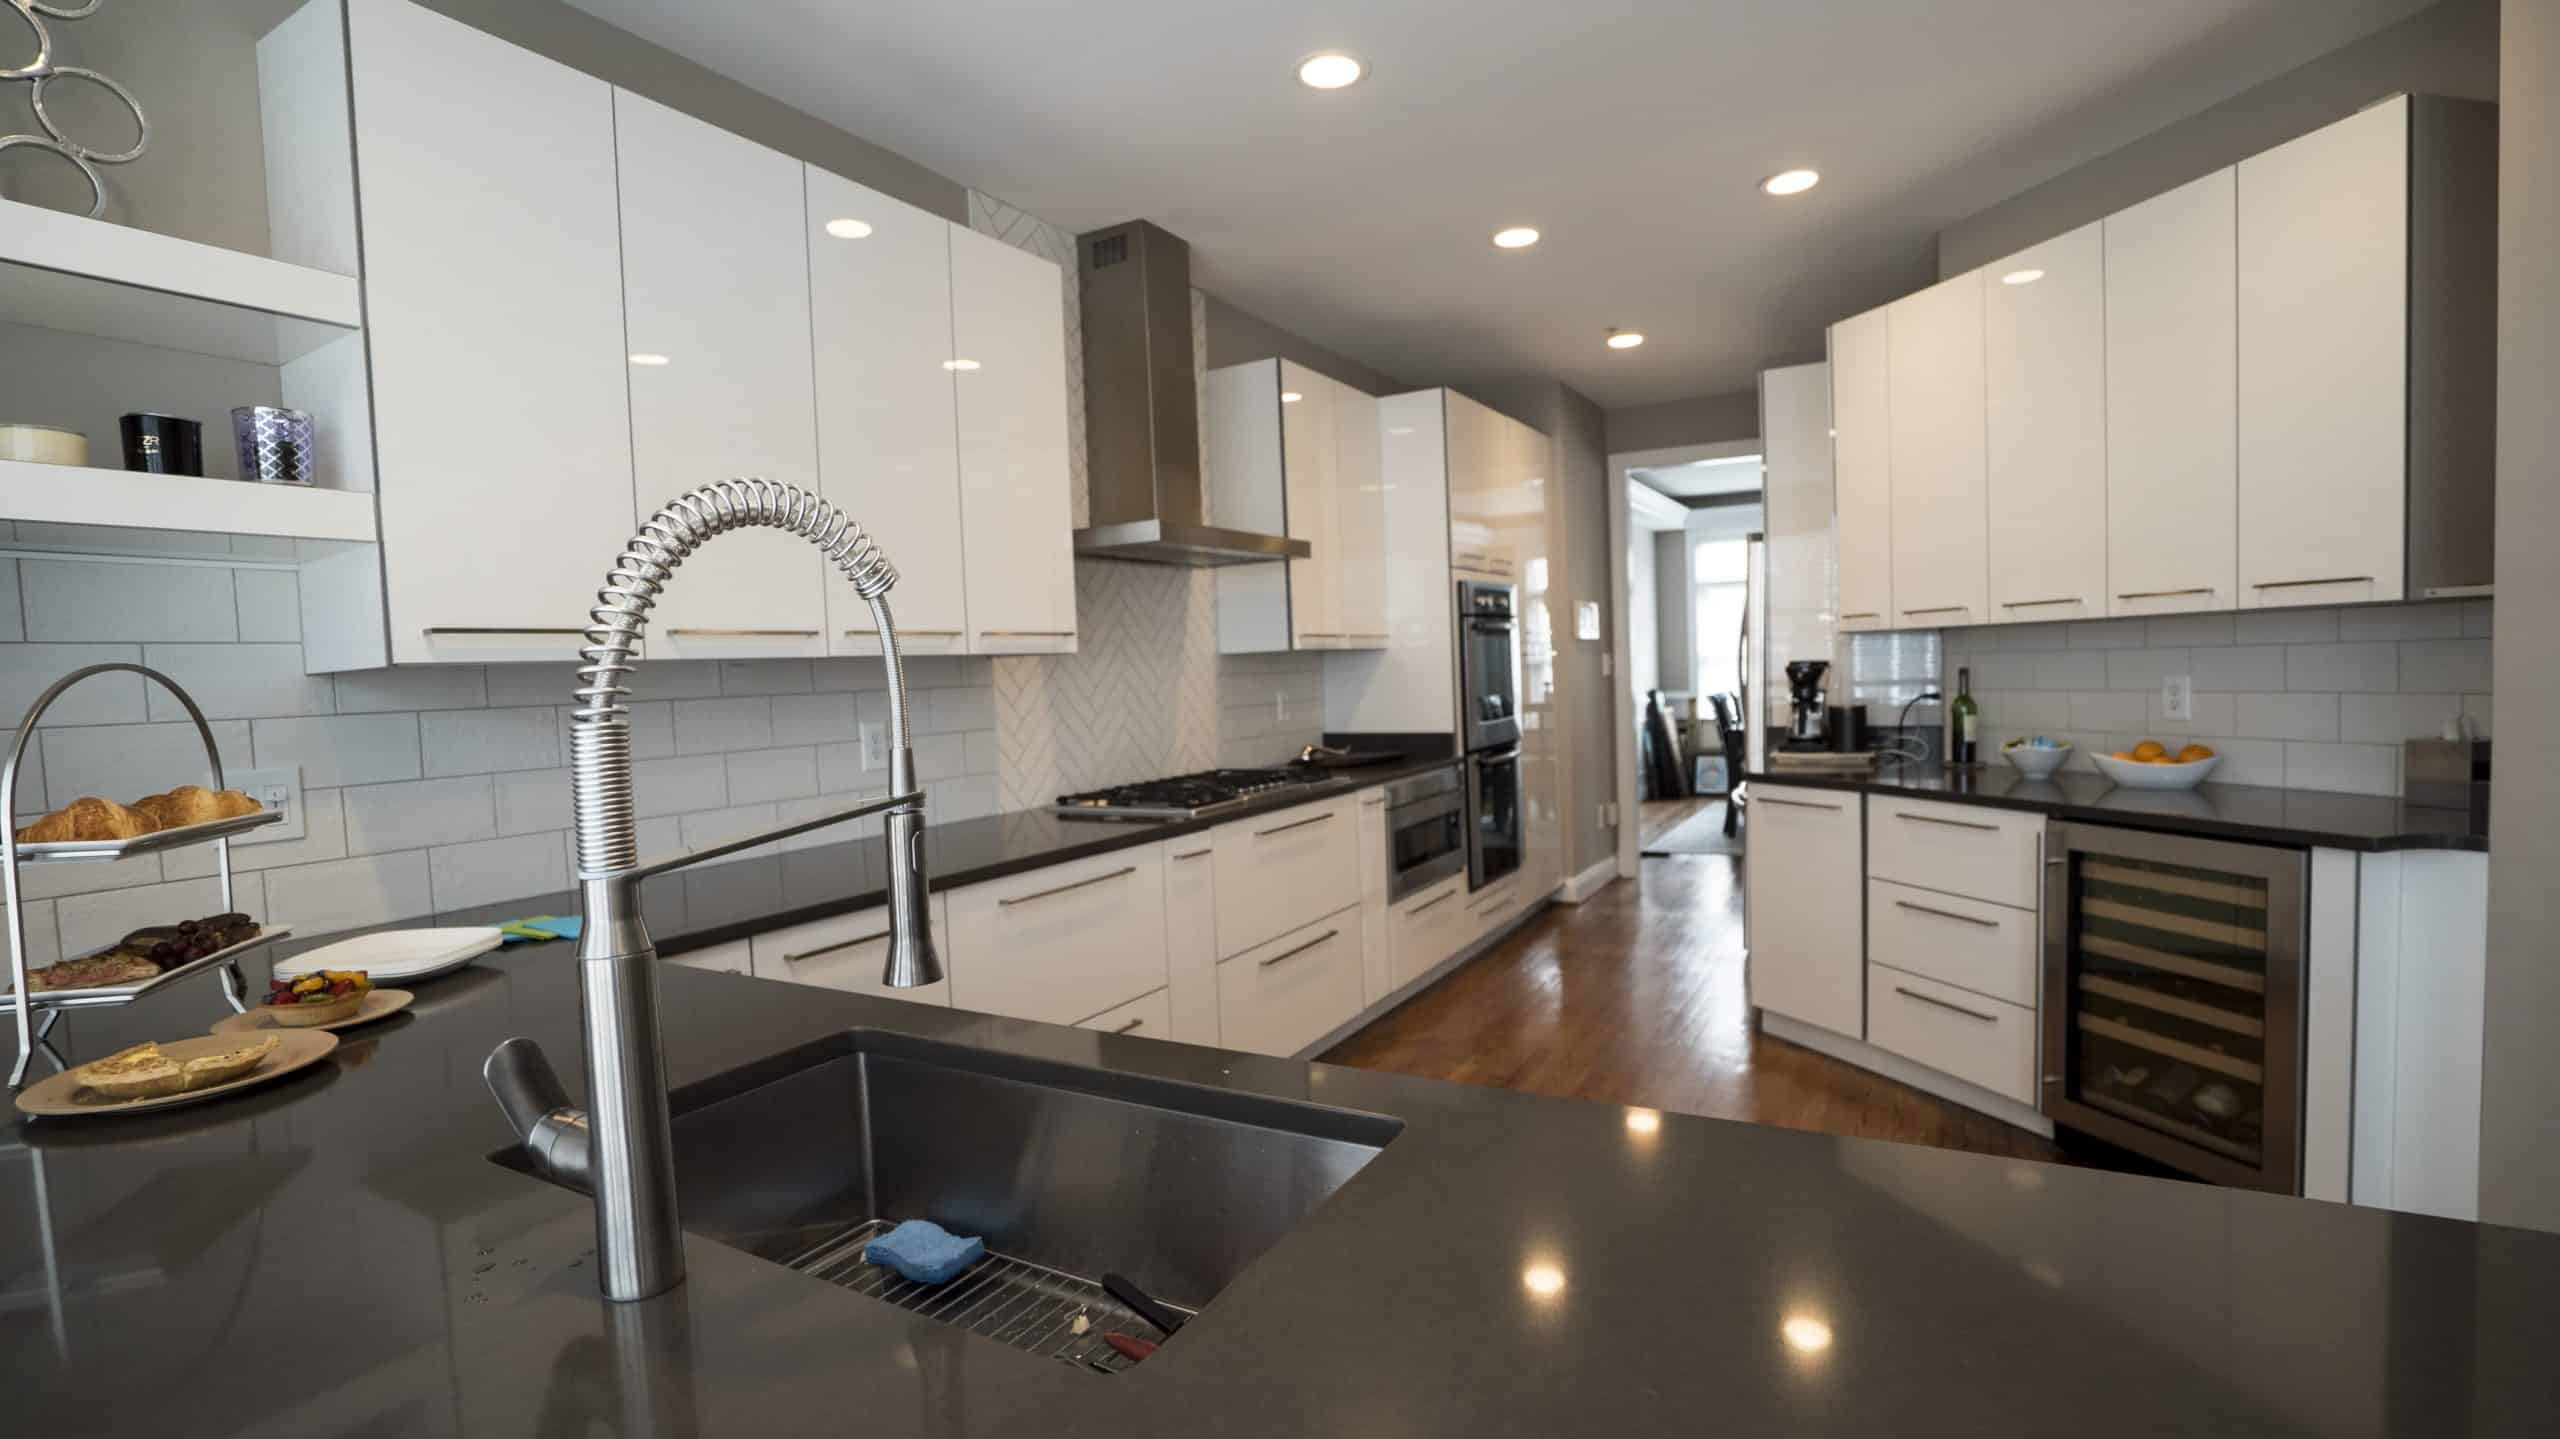 A modern kitchen with sleek stainless steel appliances and pristine white cabinets.